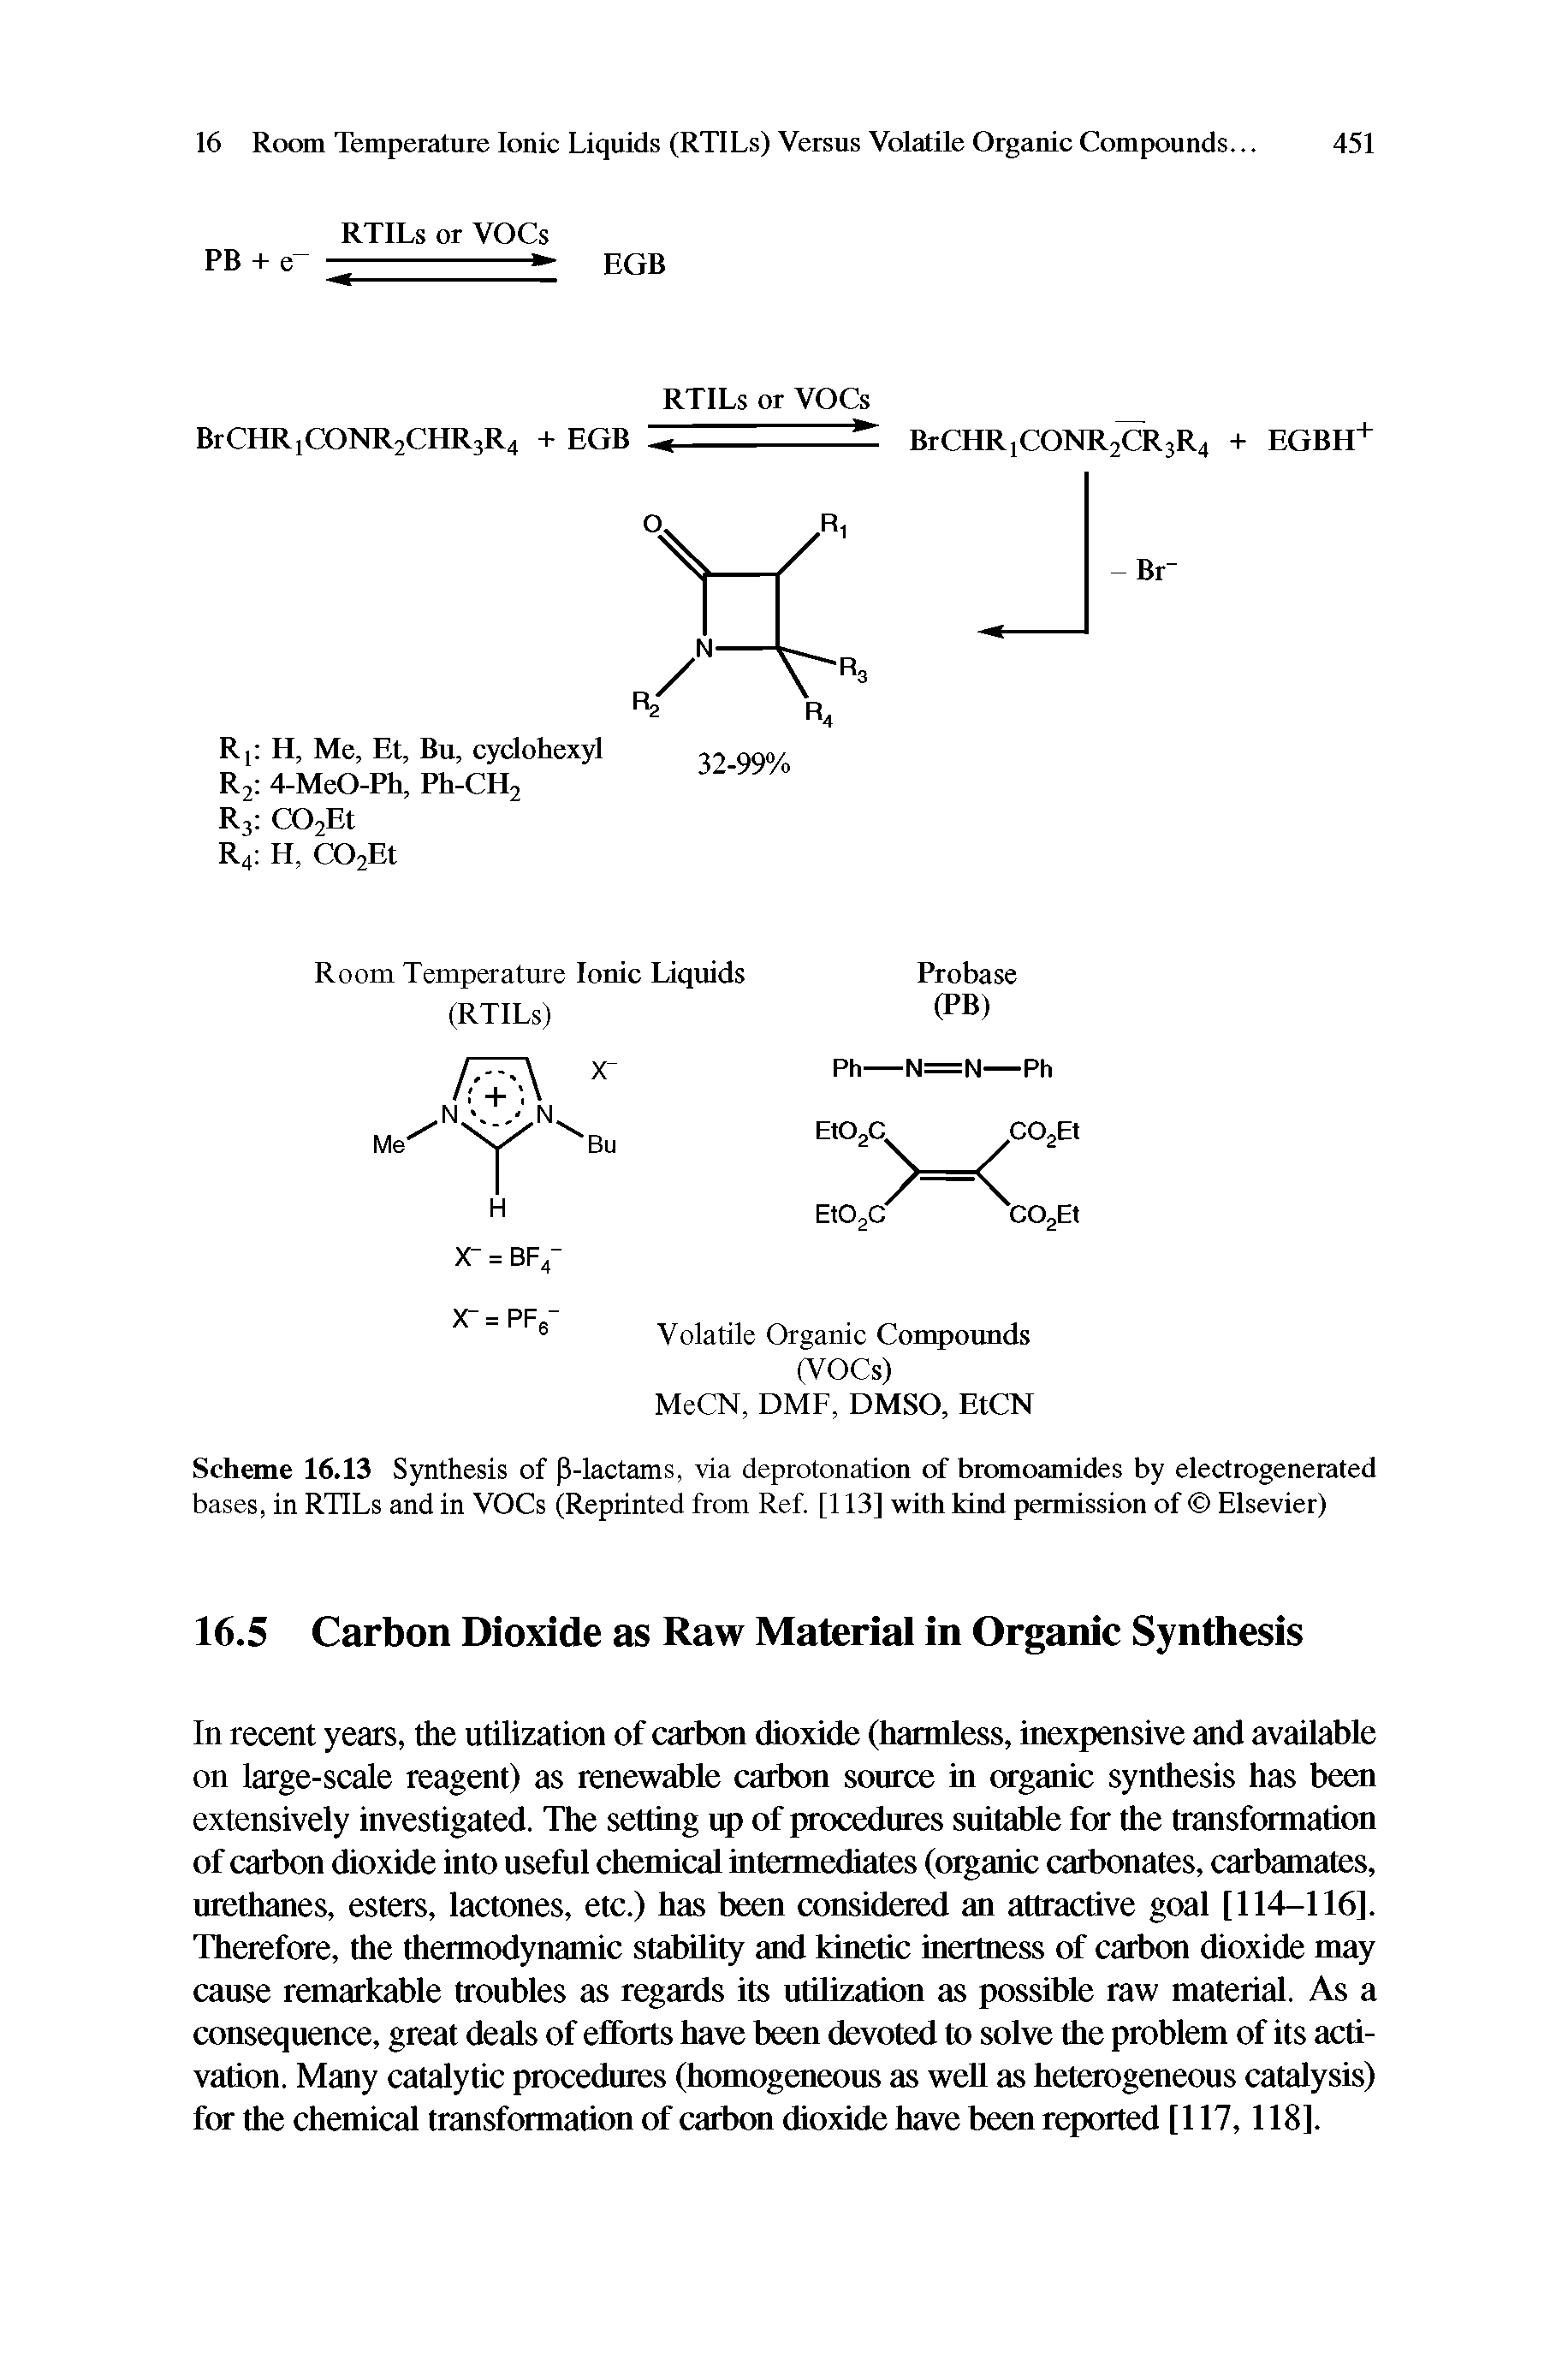 Scheme 16.13 Synthesis of P-lactams, via deprotonation of bromoamides by electrogenerated bases, in RTILs and in VOCs (Reprinted from Ref. [113] with kind permission of Elsevier)...